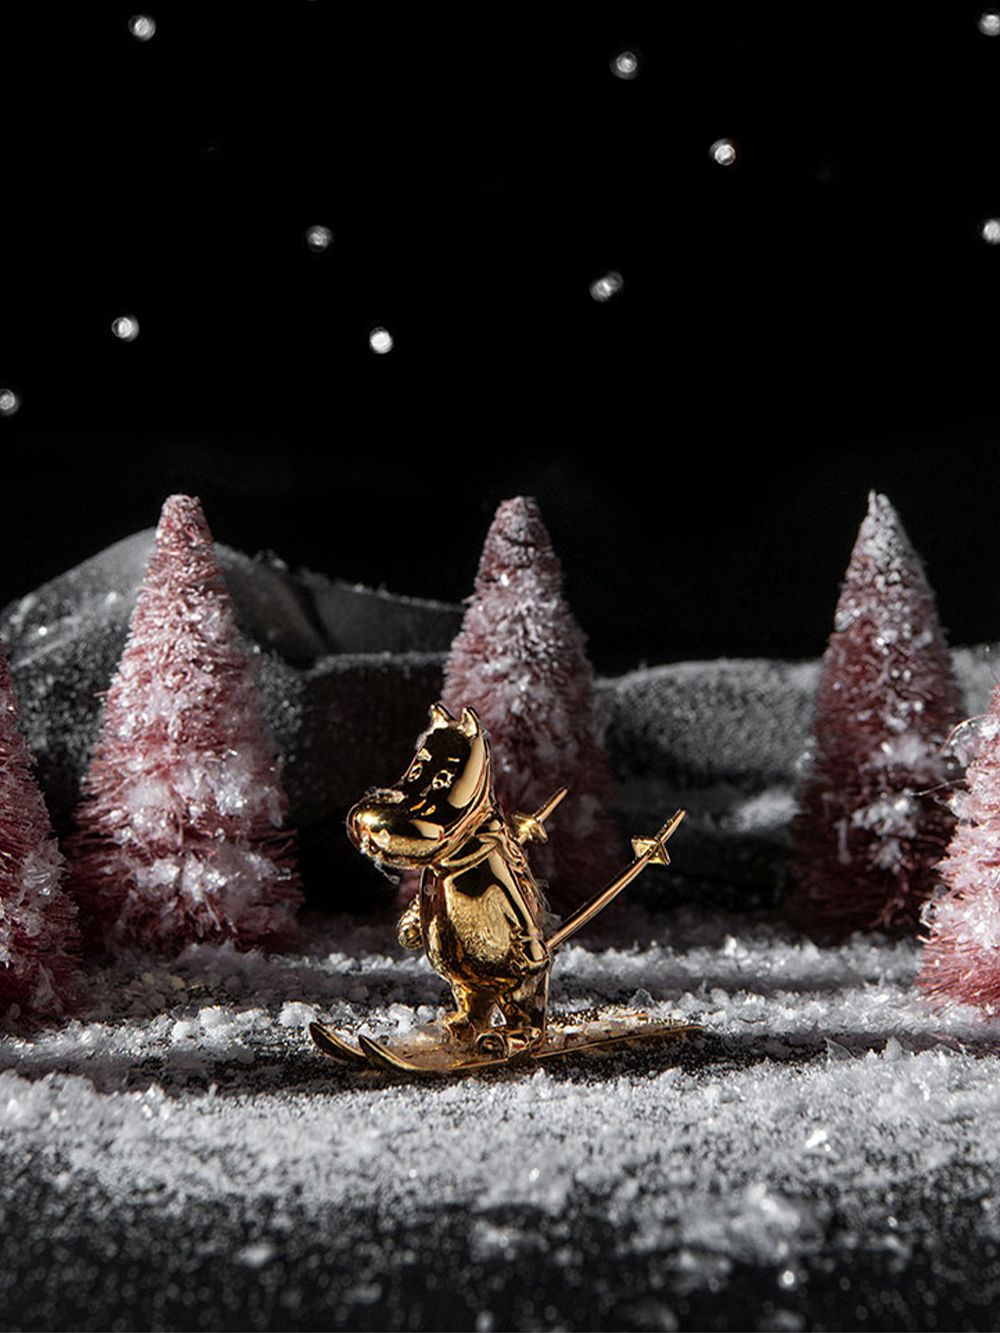 A gilded Moomintroll figurine with skis and sticks in a dark wintery lanscape with trees and hills in the background.